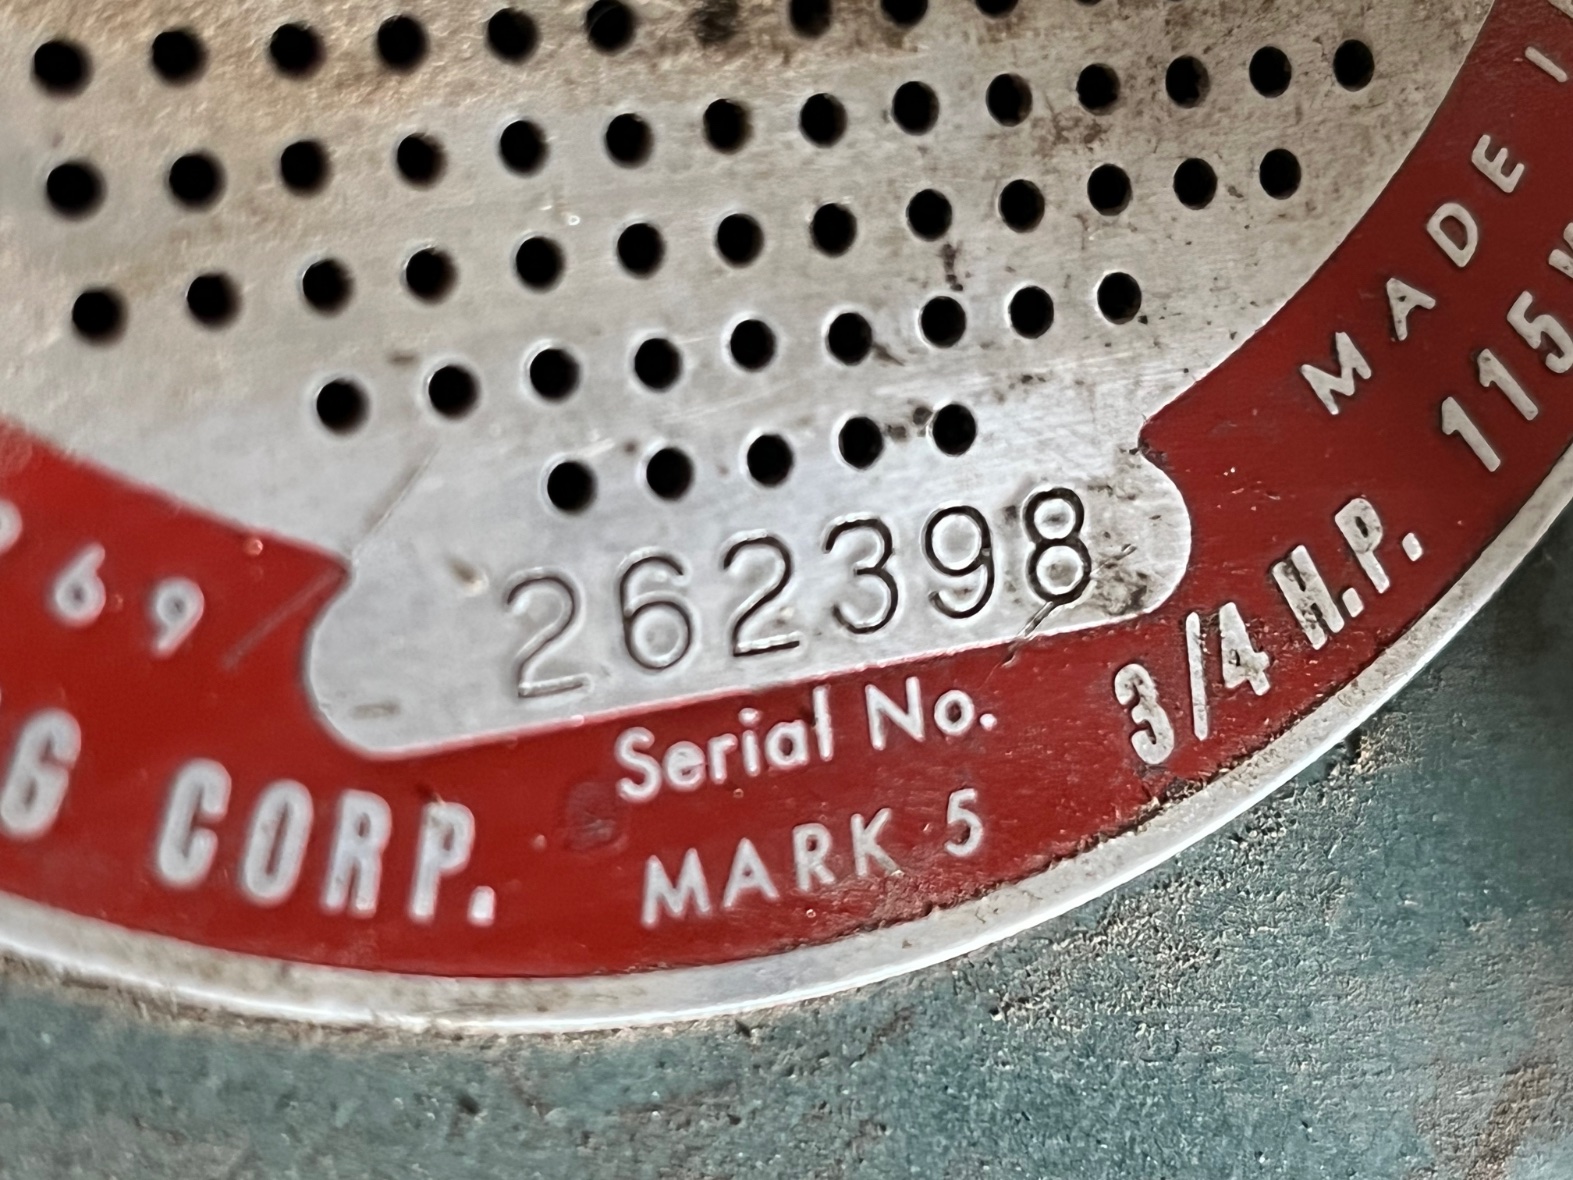 Mark 5 miles Serial number before the shop smith serial number site list